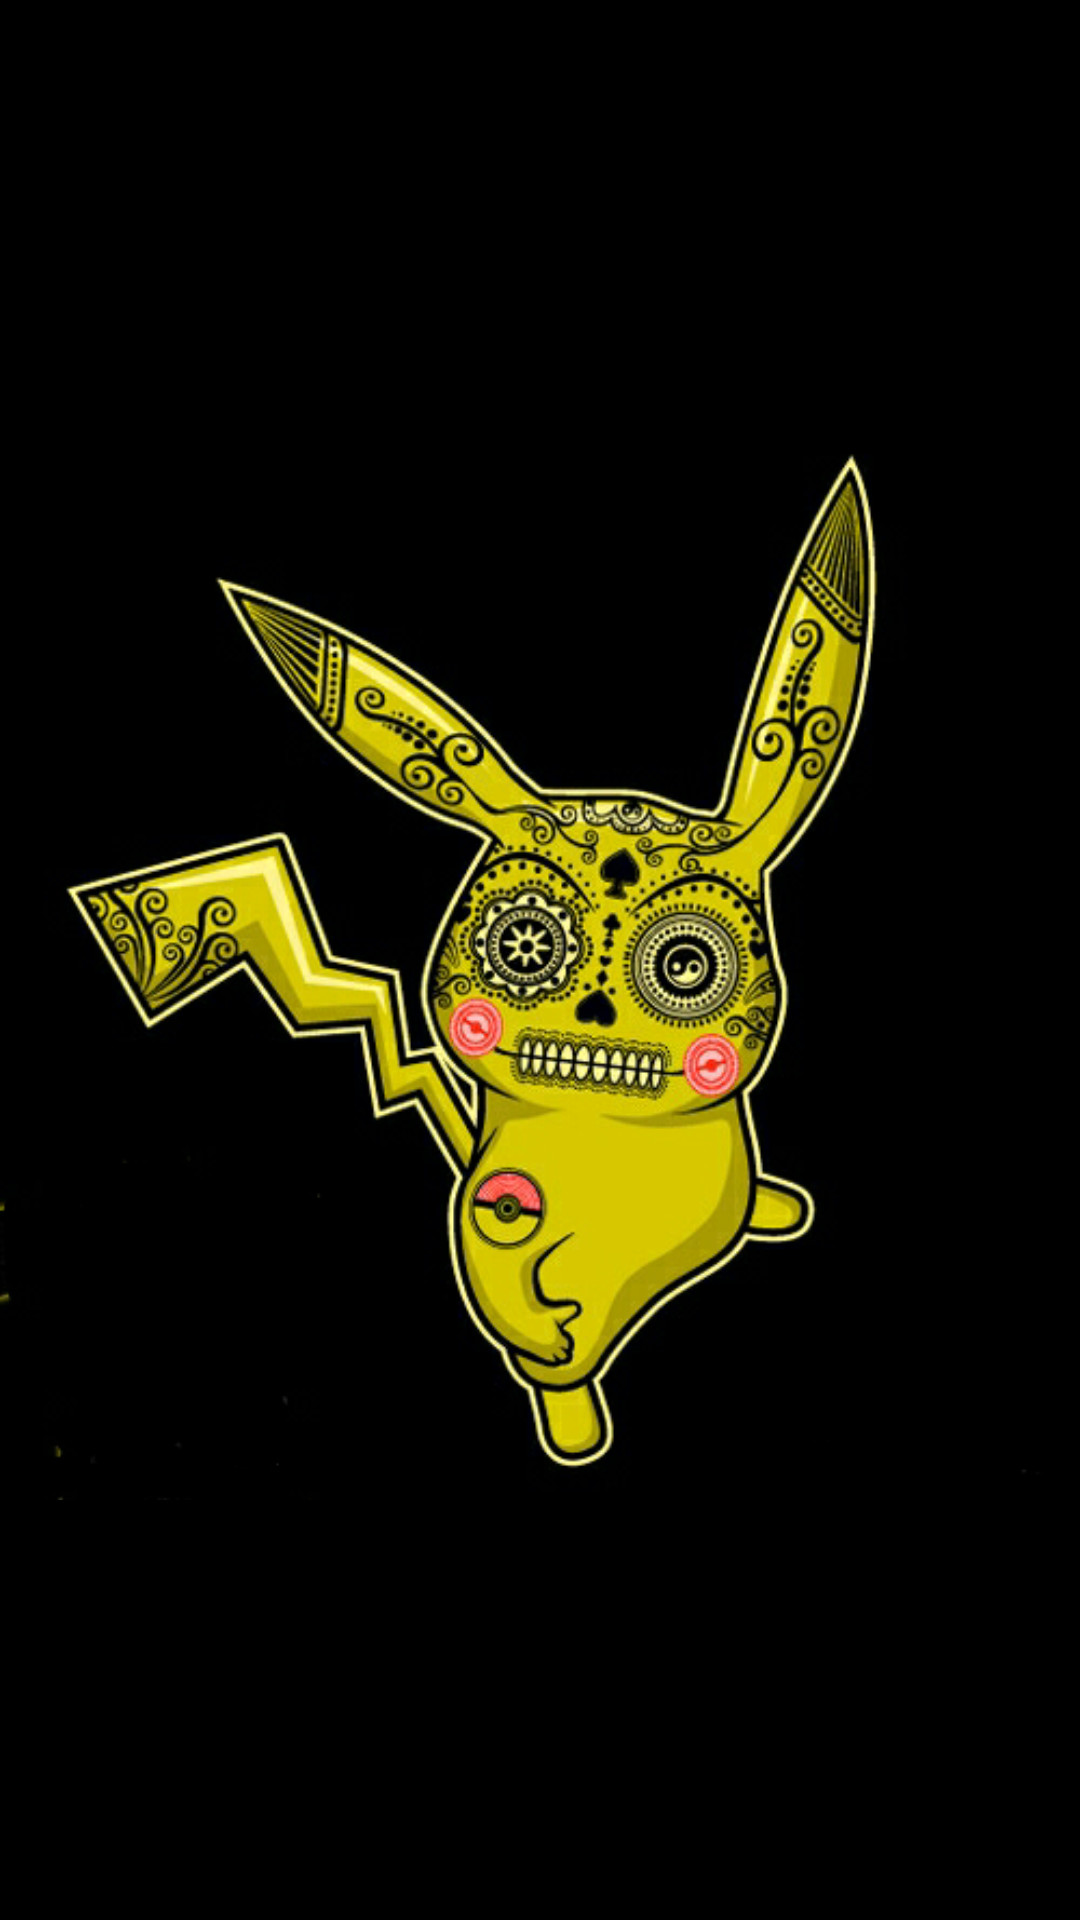 1080x1920 Pikachu with a Day of the Dead make-up - Pokemon Wallpaper